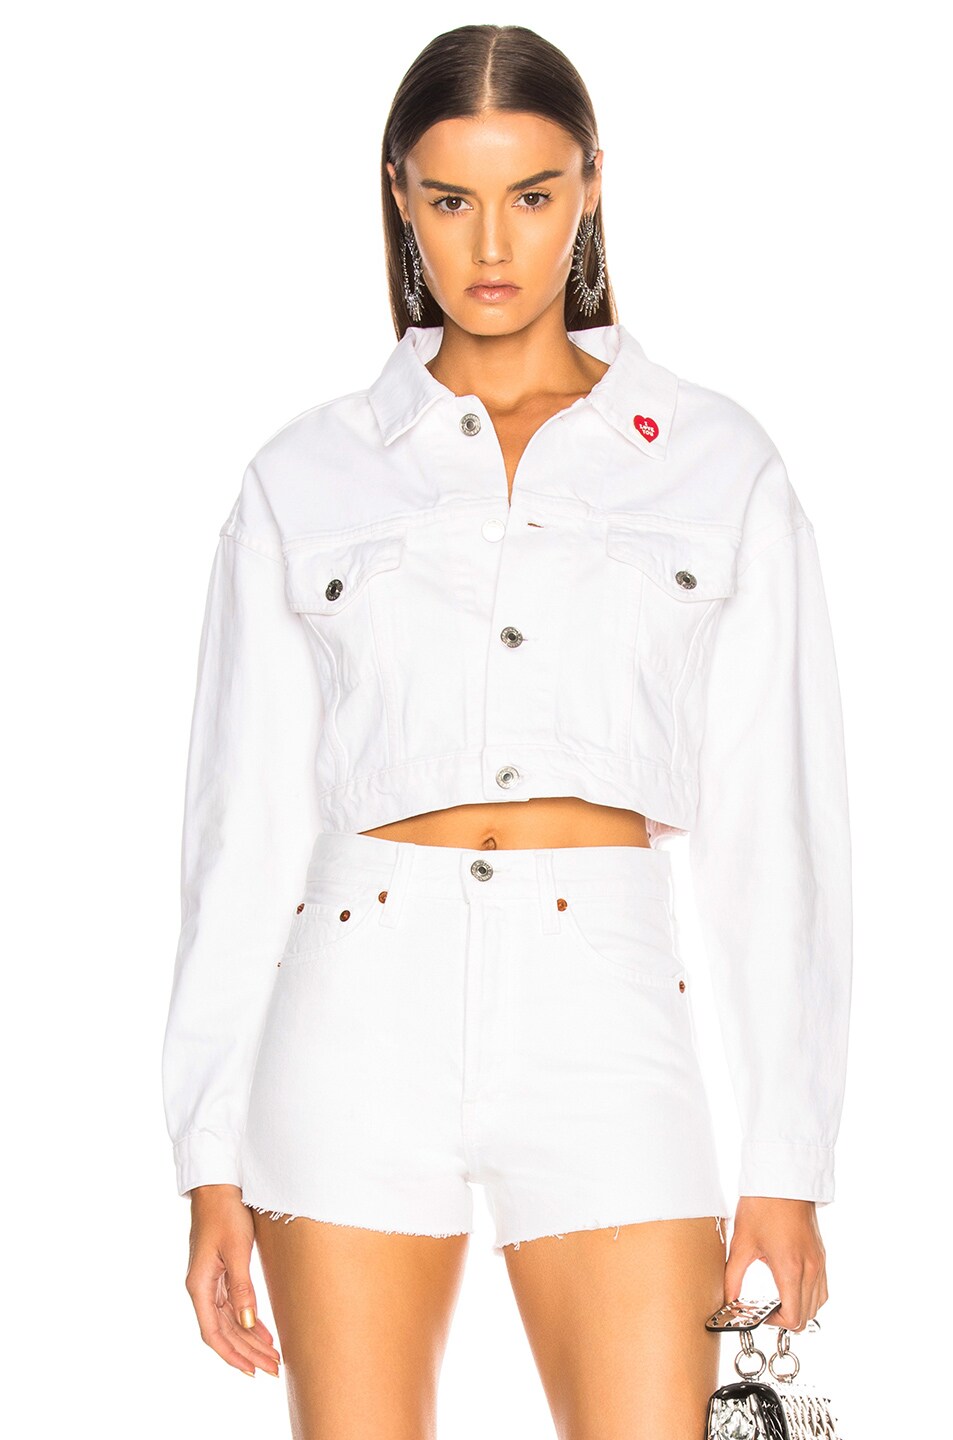 Solid & Striped x RE/DONE Hollywood Cropped Jacket in Dirty White | FWRD